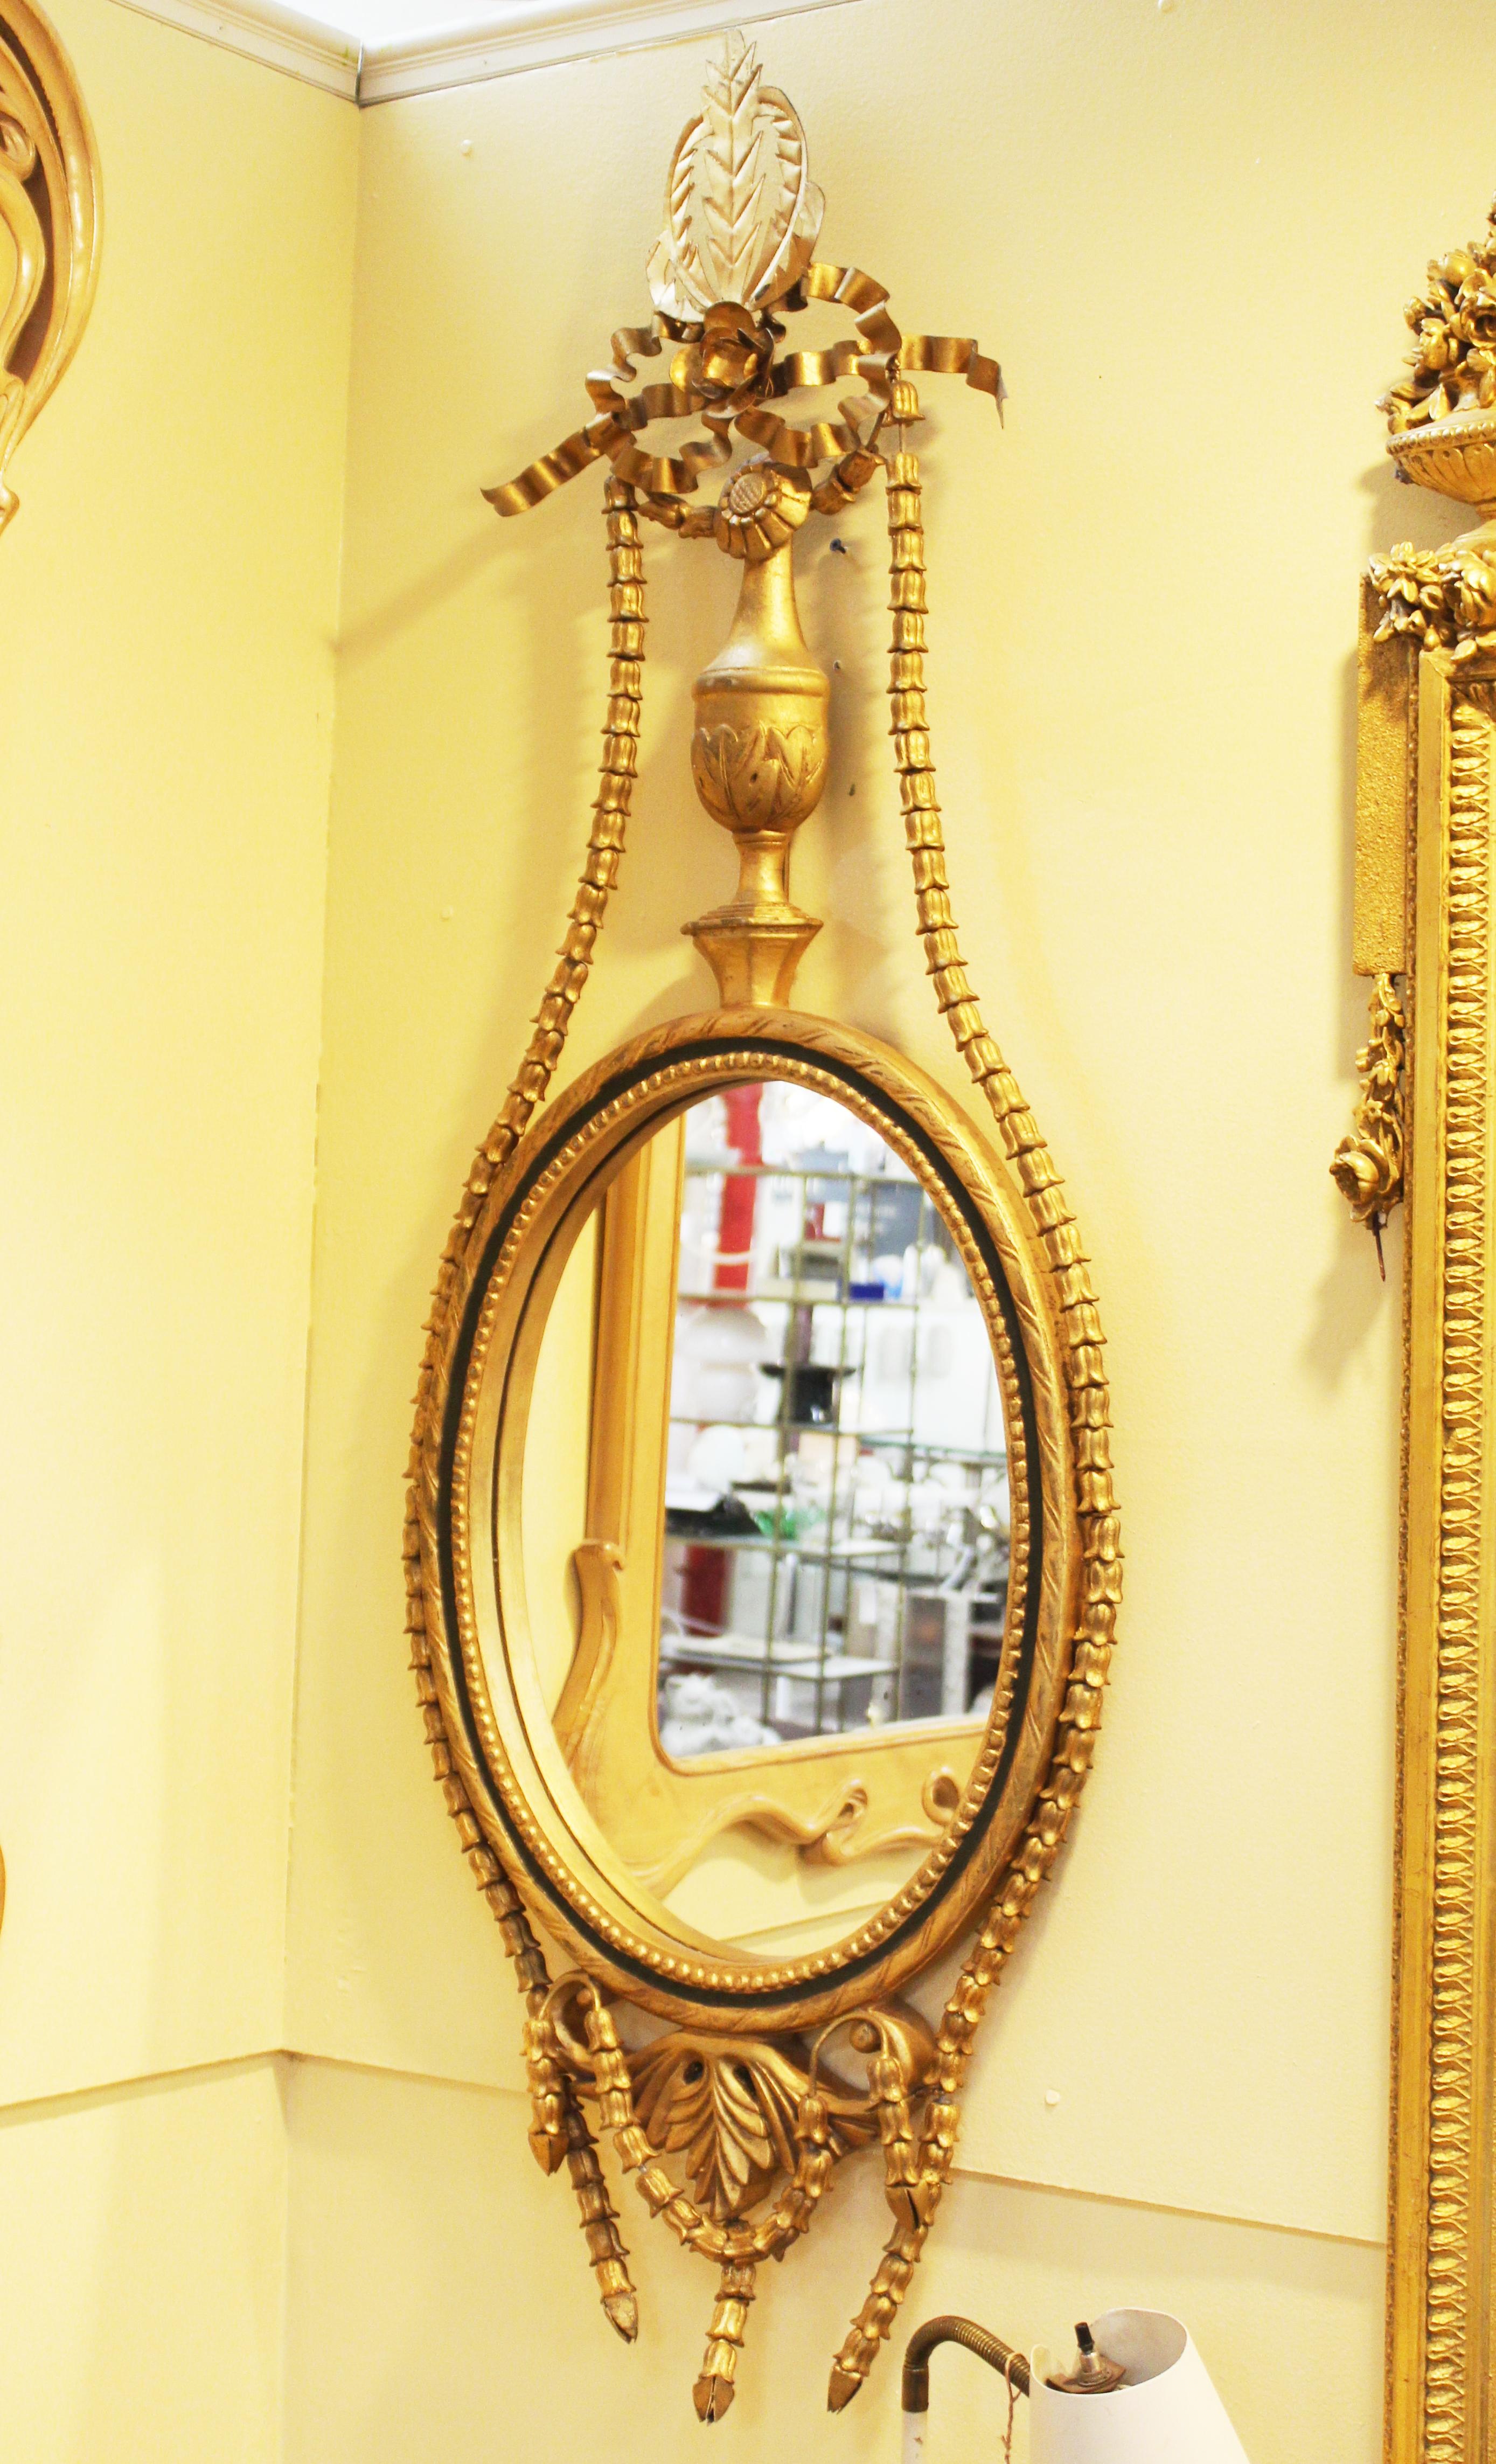 Neoclassical style wall mirror in the shape of a girandole with an oval mirror insert. The piece has floral garlands and ribbons decorating the top and bottom as well as a metal finial. In great vintage condition with age-appropriate wear and use.